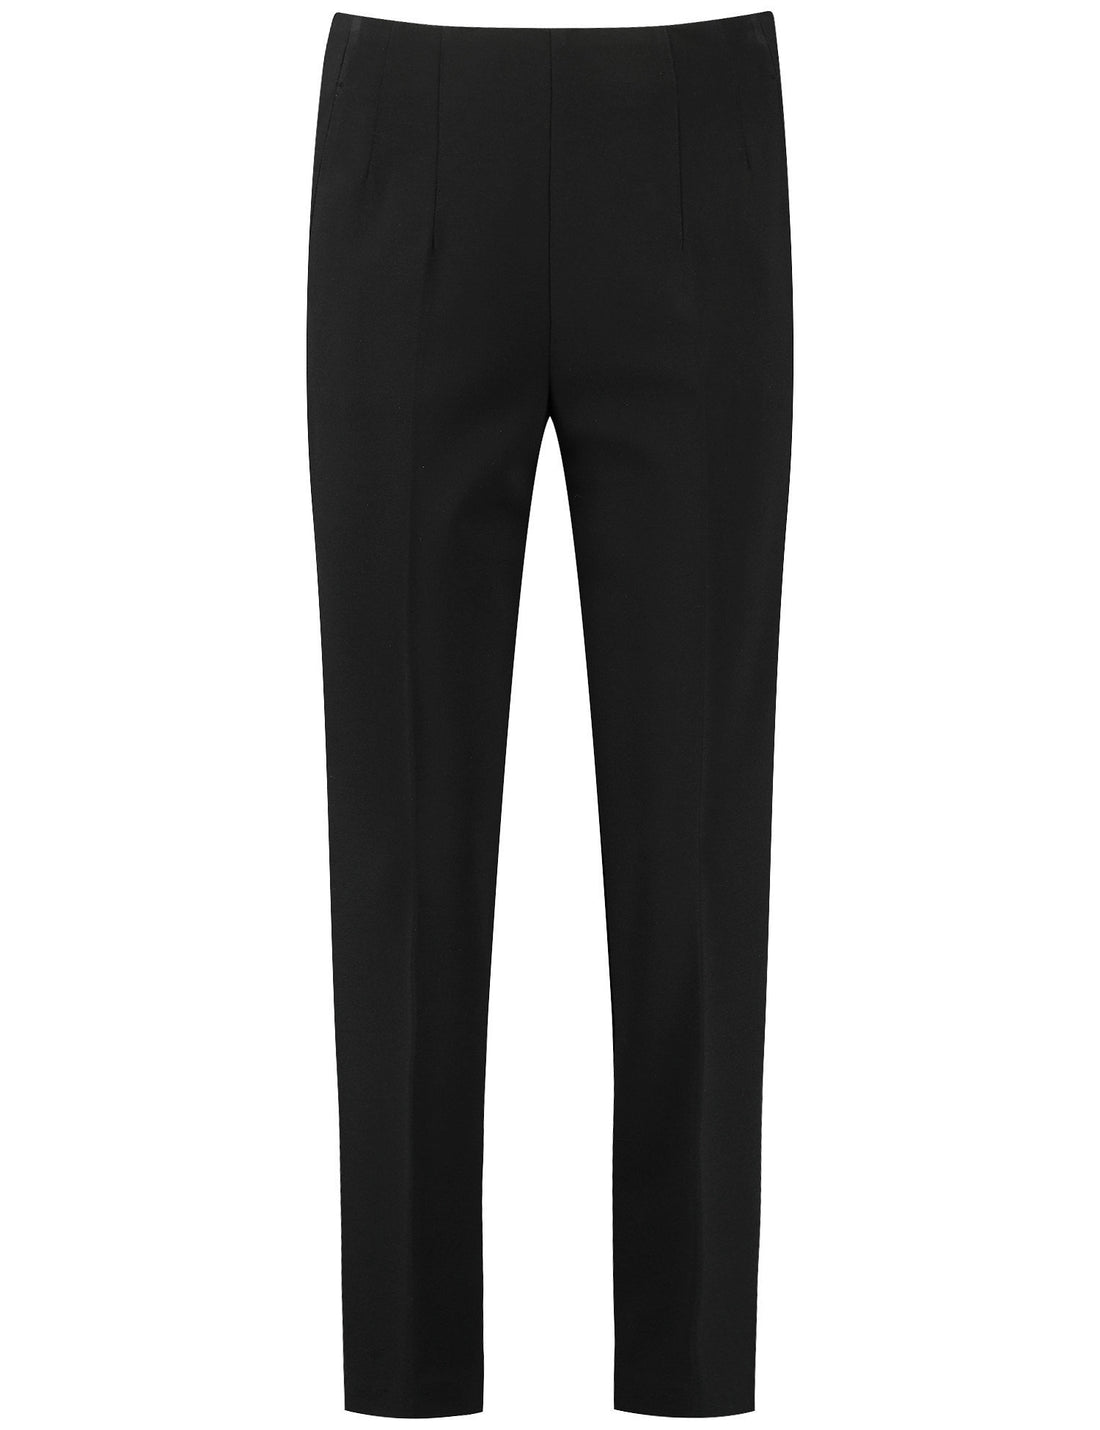 7/8-Length Stretch Trousers In A Slim Fit_420415-11257_1100_02